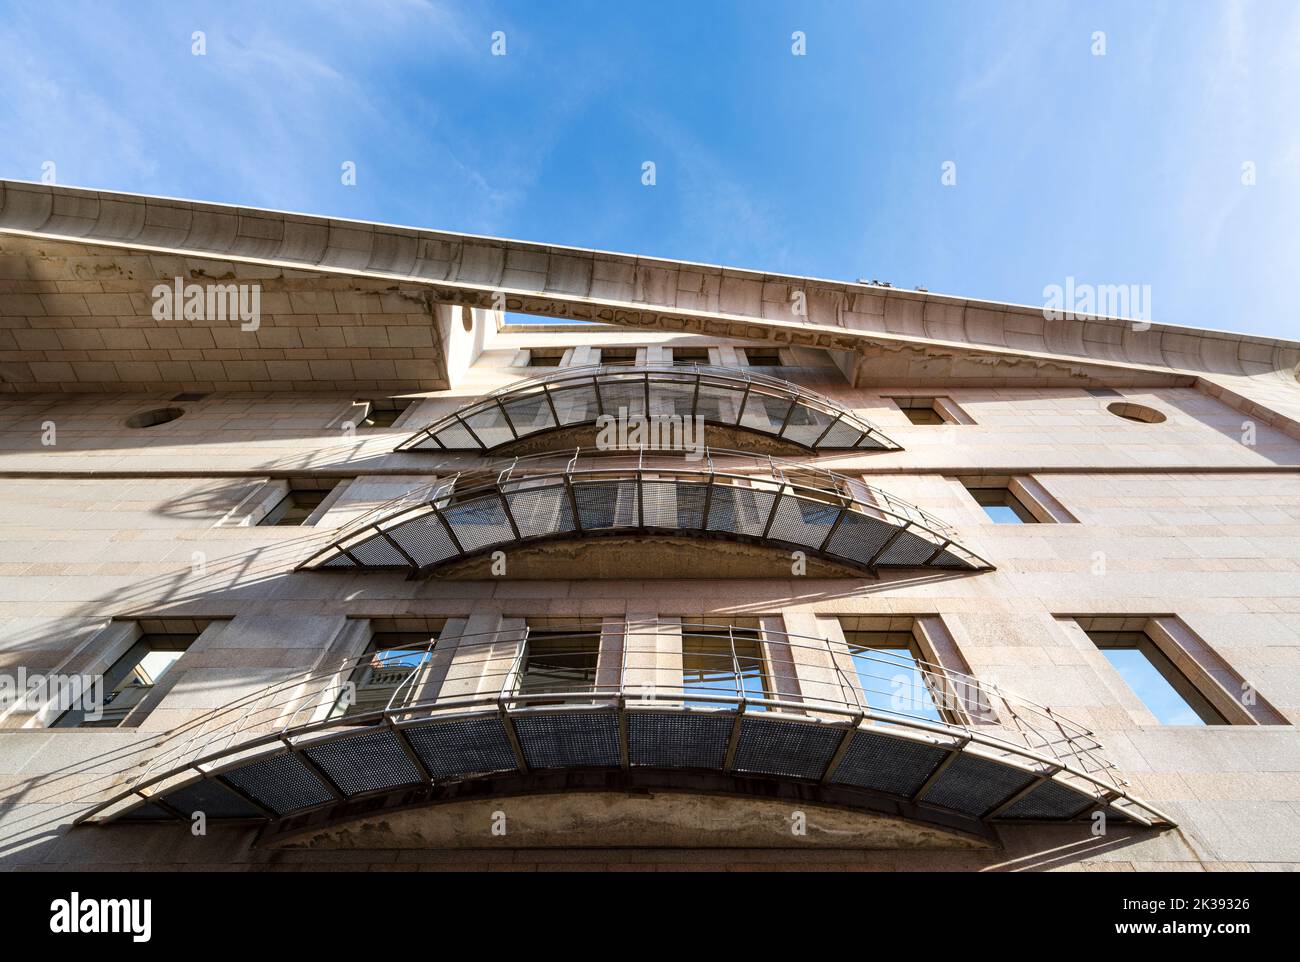 Madrid, Spain, September 2022. exterior view from below of the architecture of the senate building in the city center Stock Photo